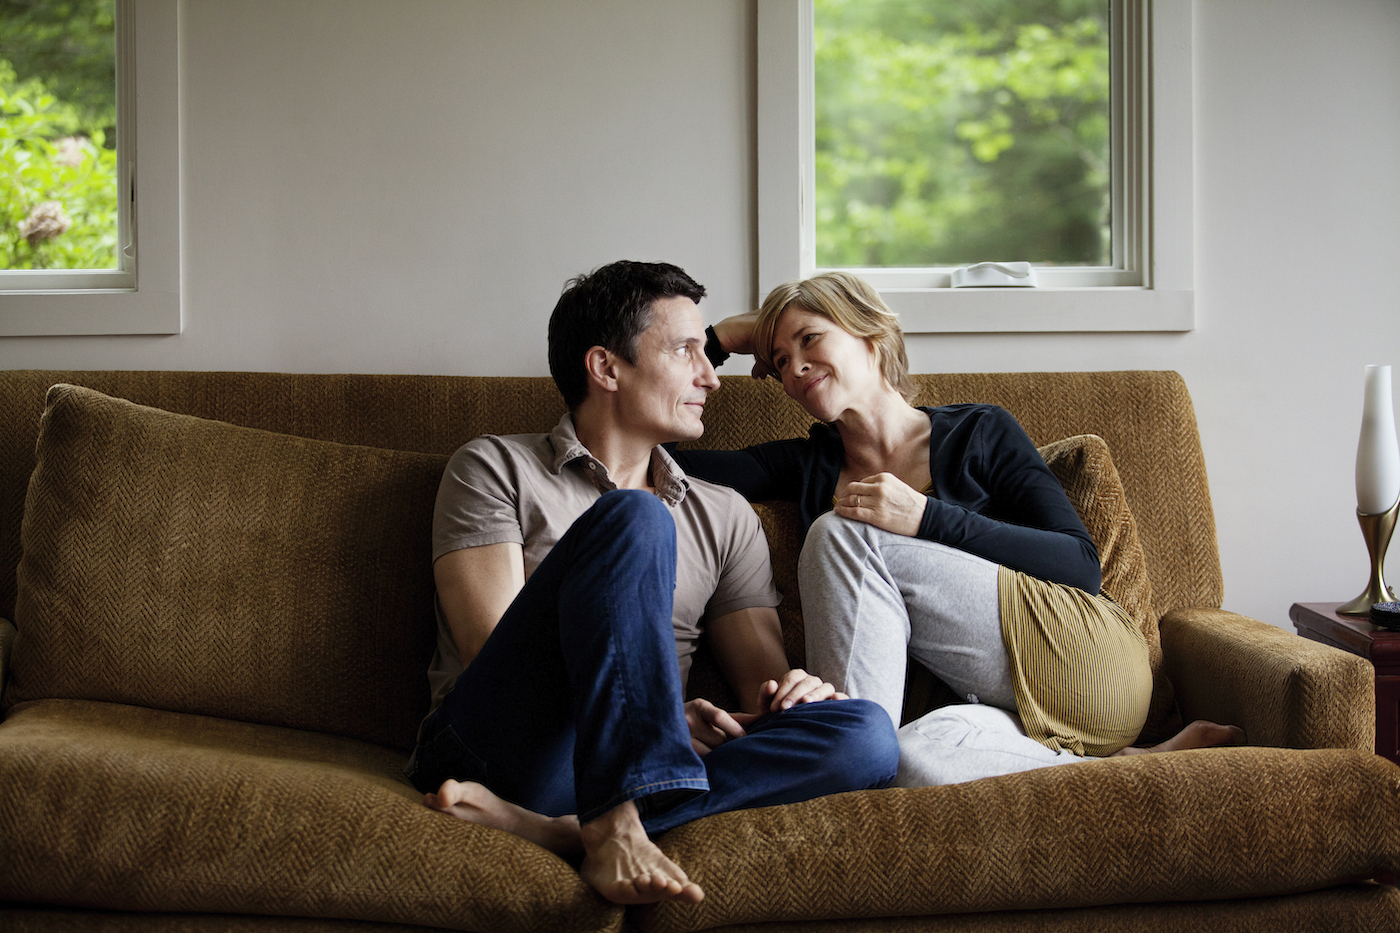 A couple sits on a sofa while looking into each other's eyes.